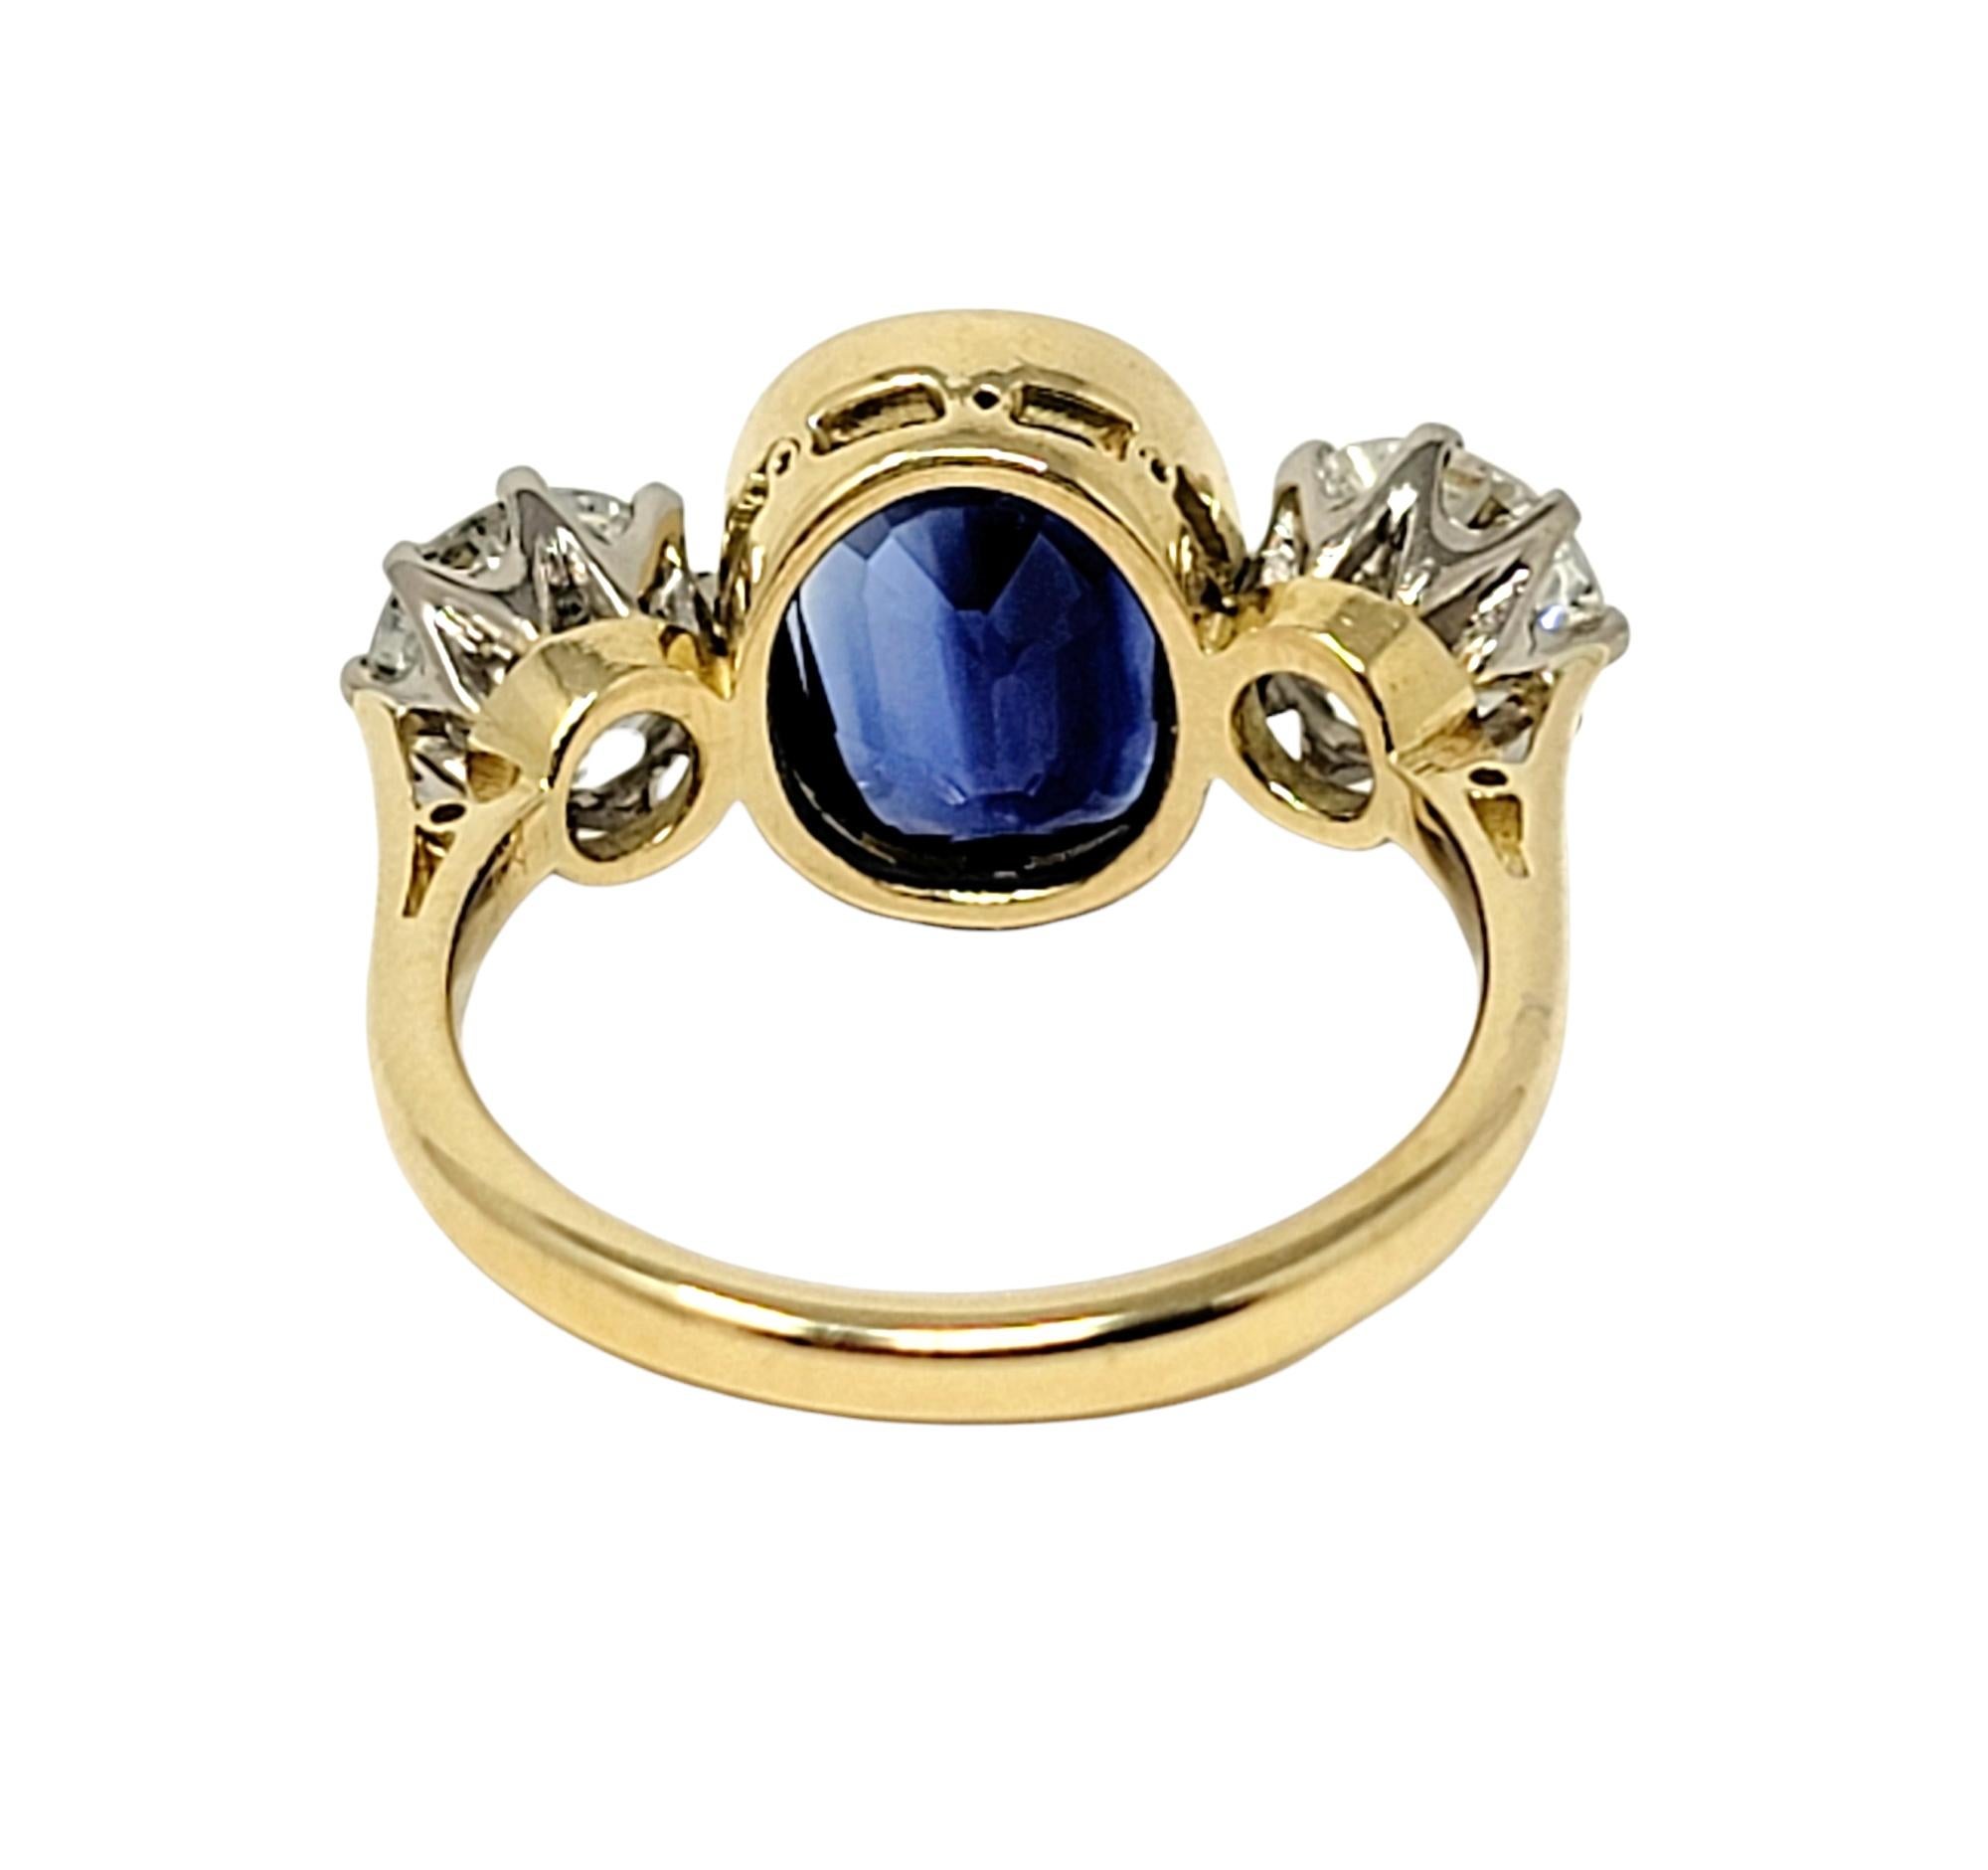 5.70 Carats Total Cushion Cut Natural Blue Sapphire and Diamond Three Stone Ring For Sale 1